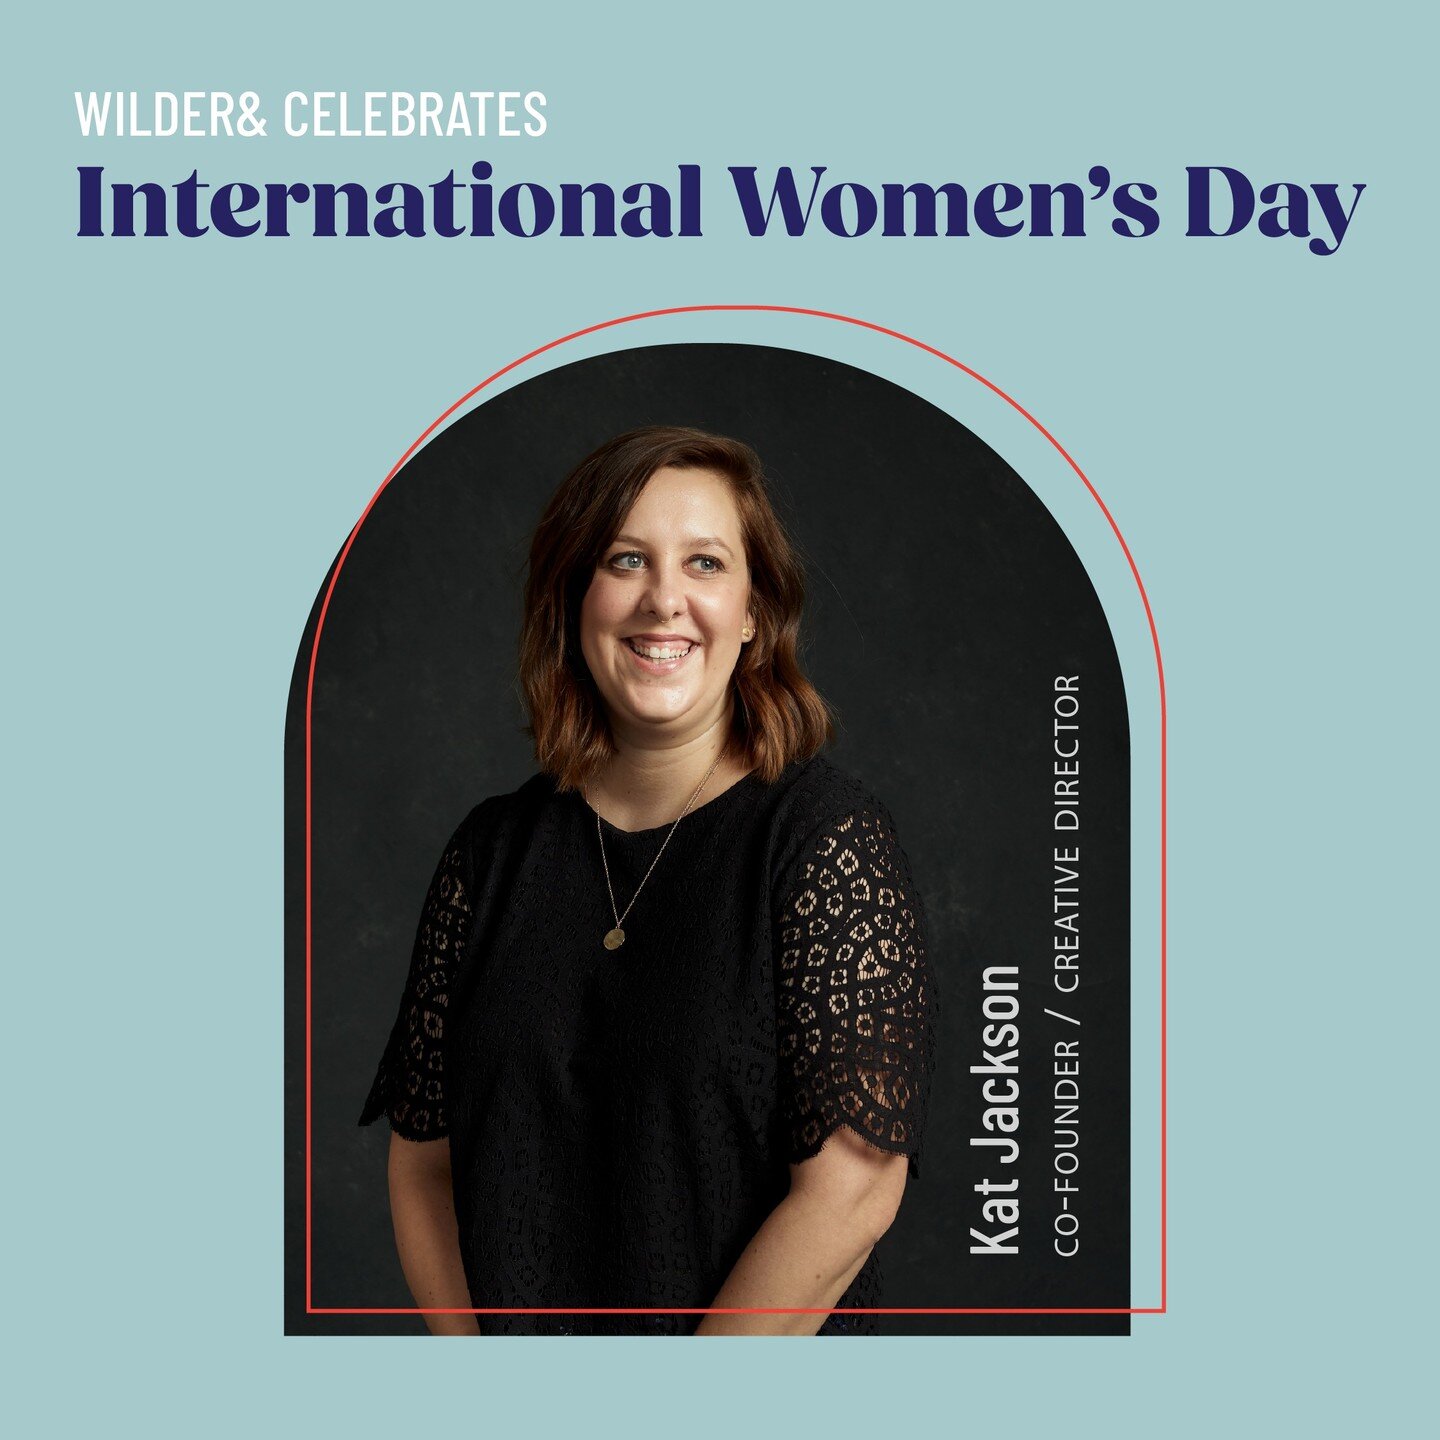 We're proud to join in #internationalwomensday by celebrating half of the sum that is Wilder&amp;. She's got a thing for lists and probably knows more about your color palette than you do. Congrats to our fierce Creative Director and walking Pantone 